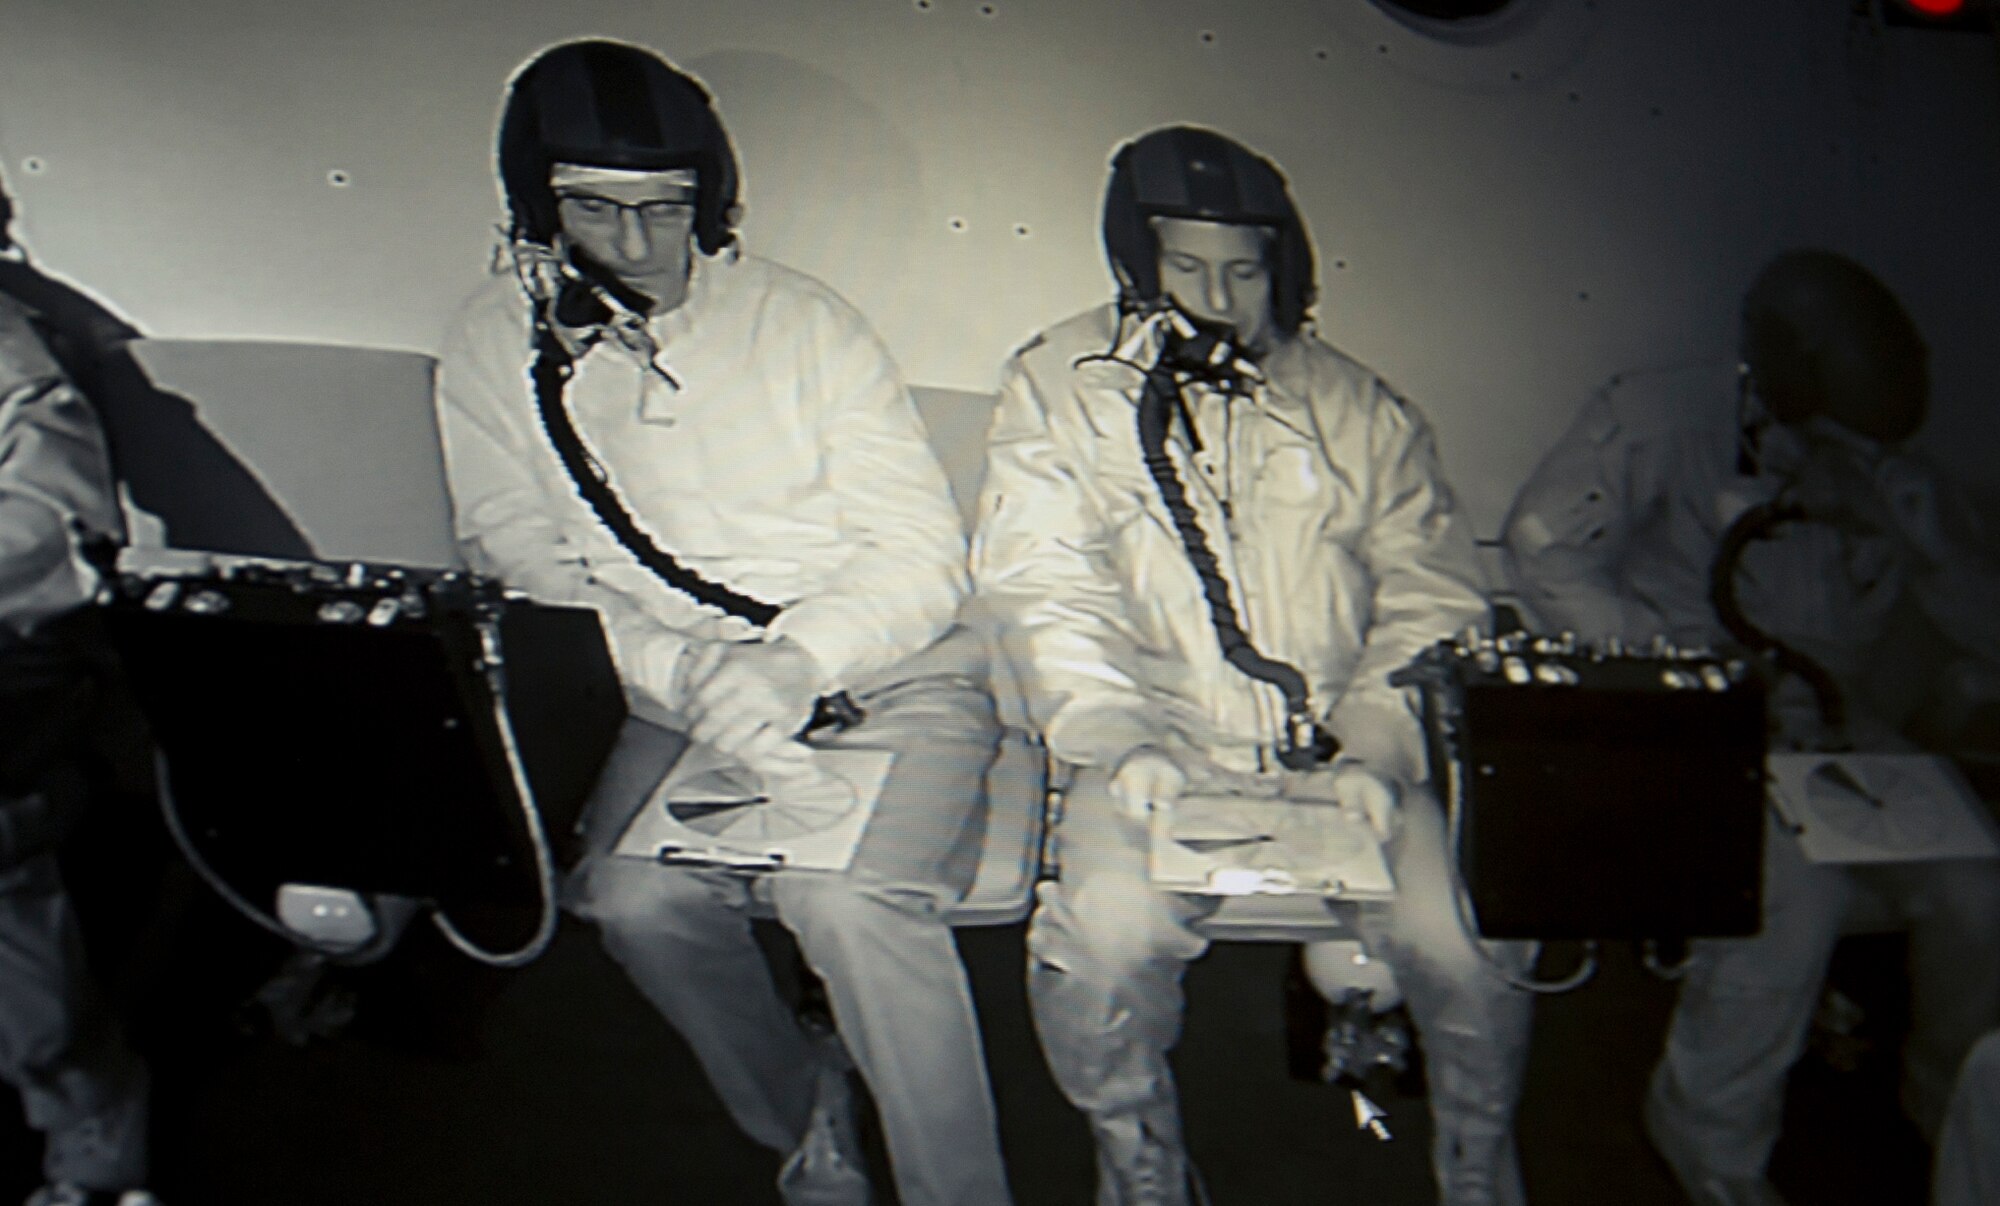 Altitude training students, David Kinsella (left) and Eric Kaufman, perform a visual acuity exercise using color wheel charts in a darkened, enclosed altitude chamber March 16, 2017 at Joint Base Andrews, Md. The exercise was one of several during the flight simulation training course that tested students' ability to identify how their bodies reacted in an environment with varying levels of air pressure. (U.S. Air Force photo by Staff Sgt. Joe Yanik)